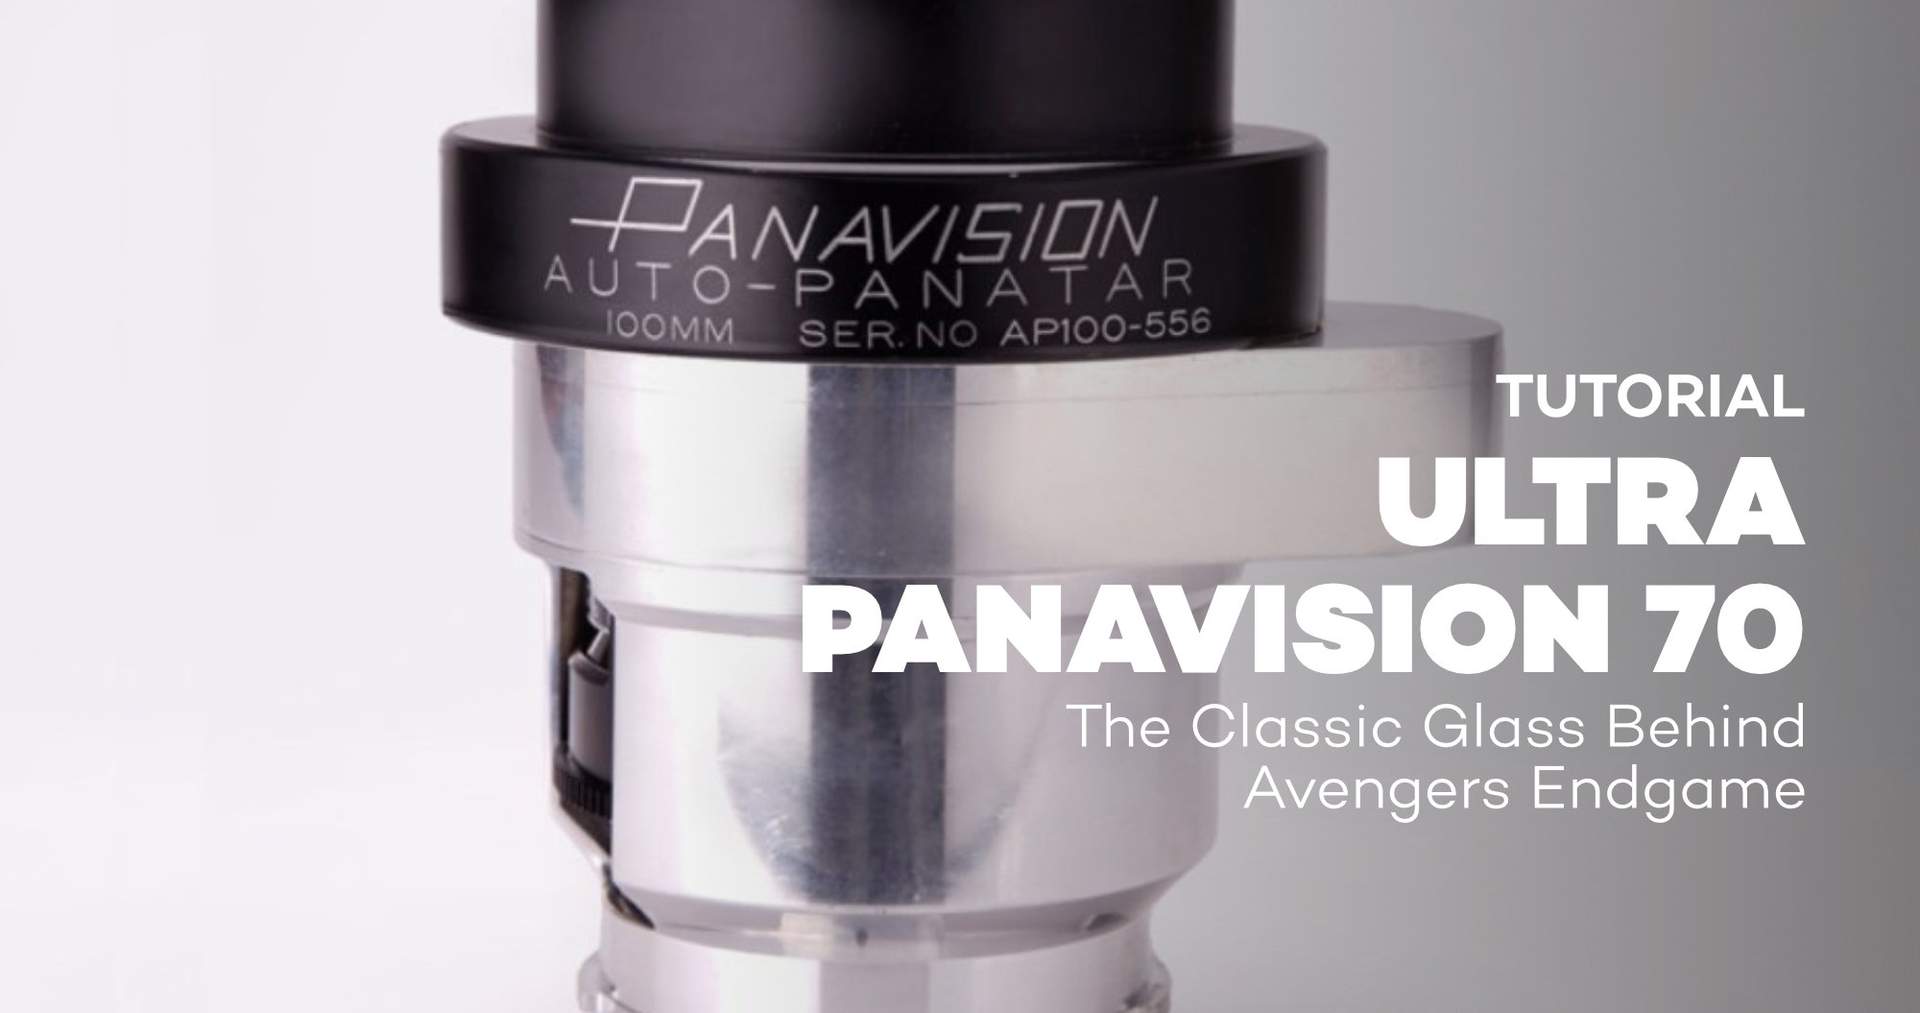 The Ultra Panavision 70